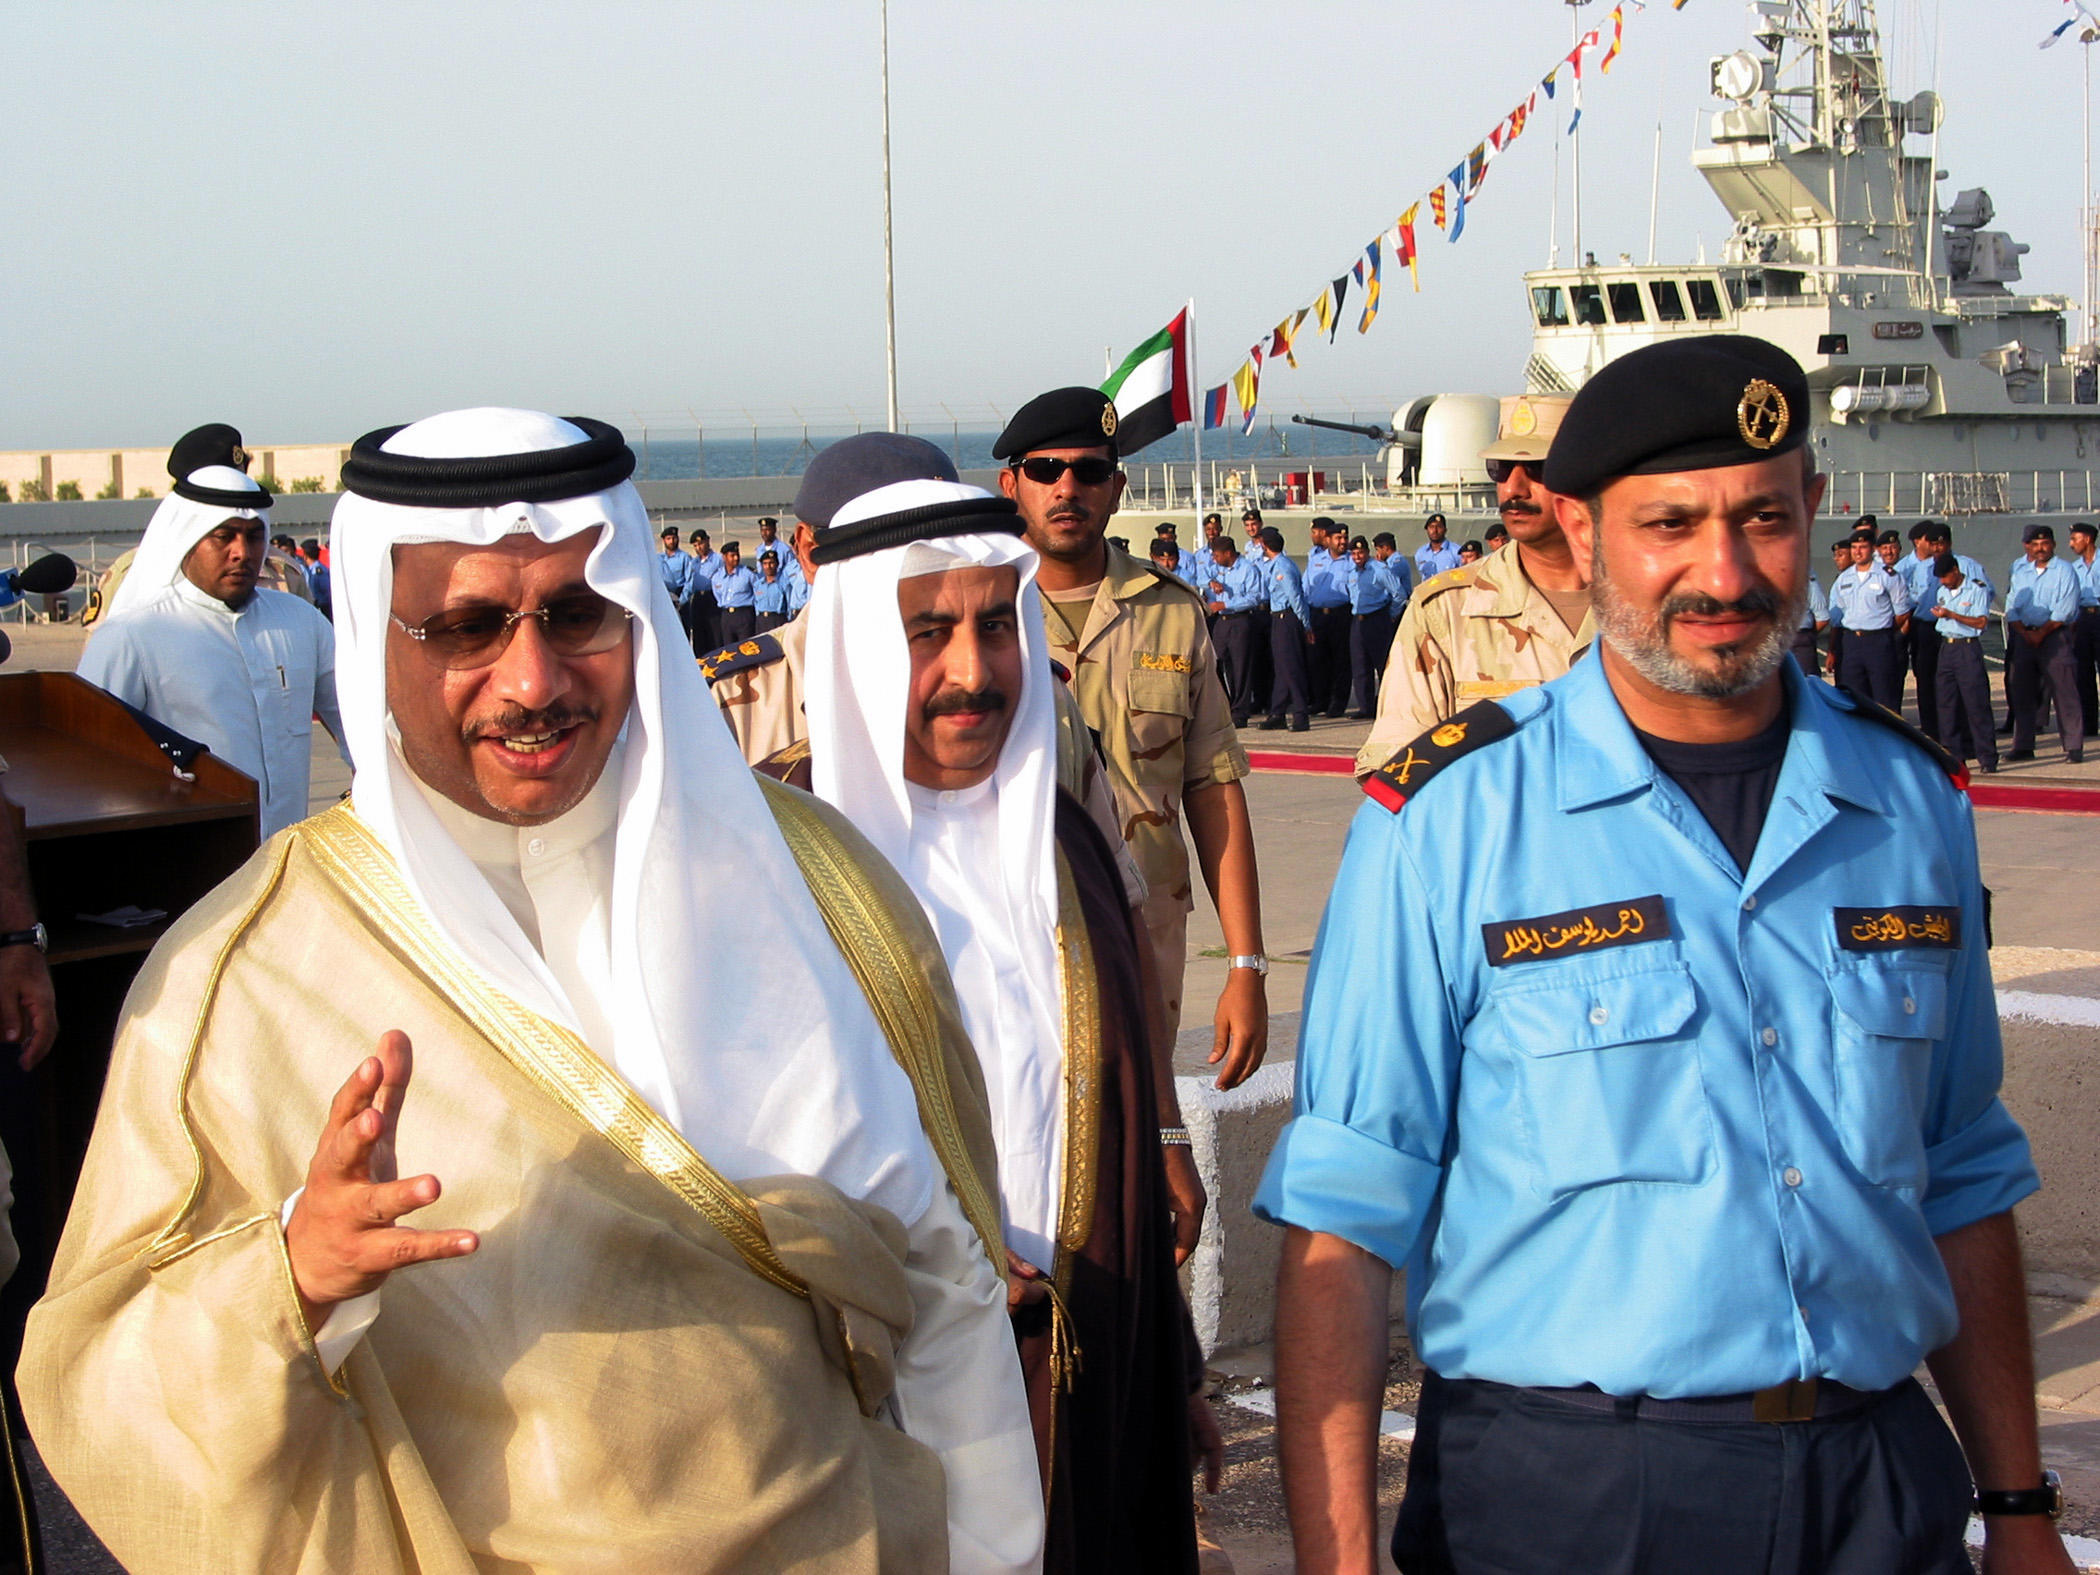 US Navy 030507-N-1050K-031 From left, Kuwait^rsquo,s Defense Minister Sheikh Jaber al-Mubarak al-Sabah completes a troop review and inspection with Commander, Kuwait Naval Forces, Maj. Gen. Ahmed Y. al-Mulla during the Sheikh^r